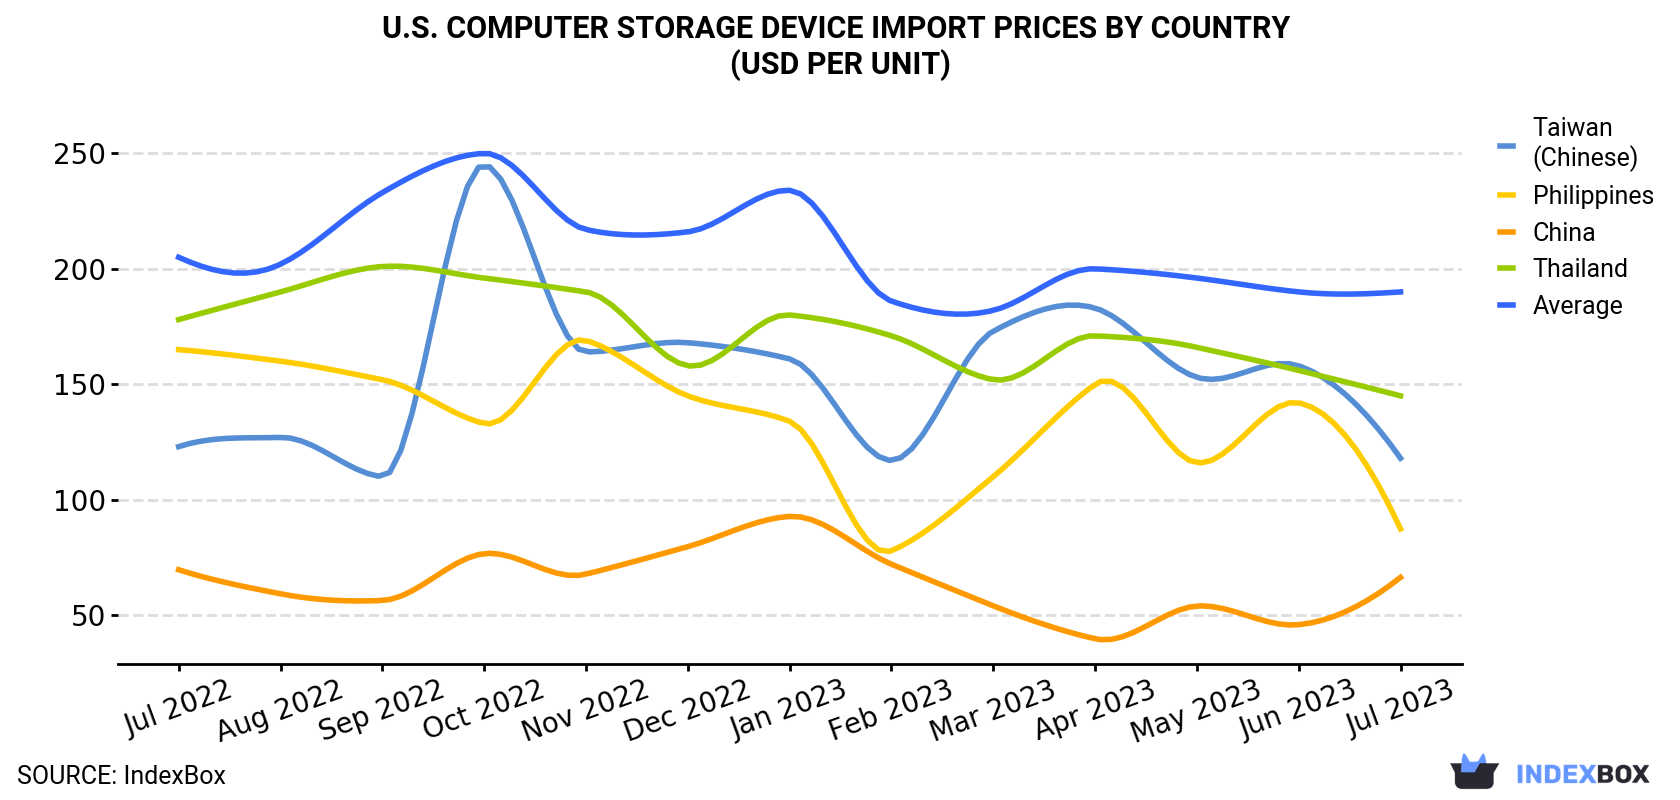 U.S. Computer Storage Device Import Prices By Country (USD Per Unit)